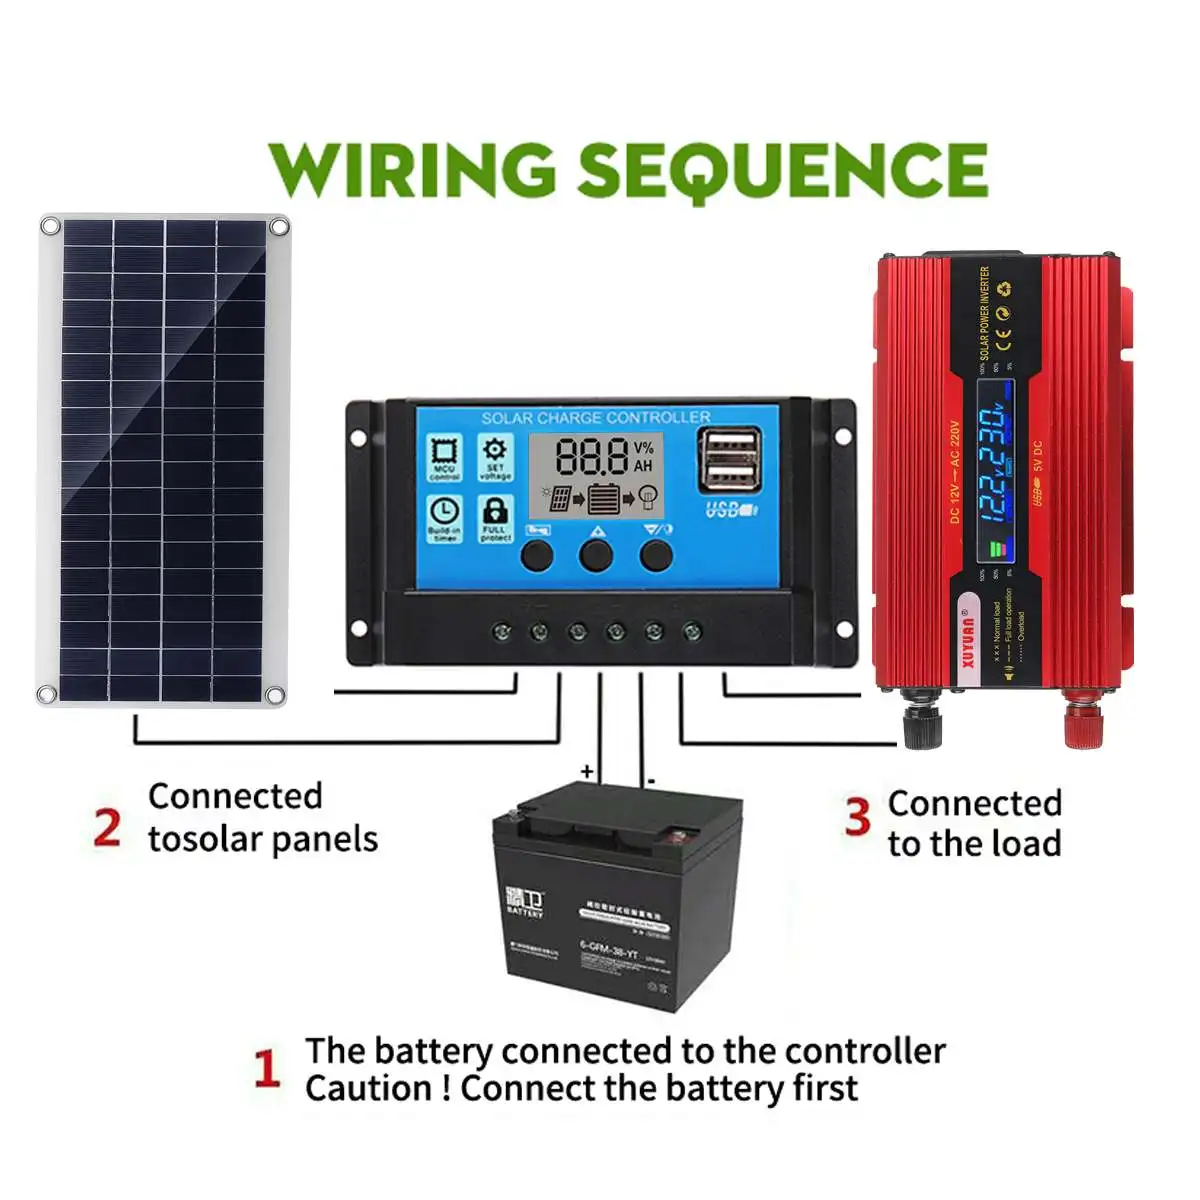 220v solar power system 100w solar panel 18v battery charger 3000w inverter kit complete 10 50a controller home grid camp phone free global shipping